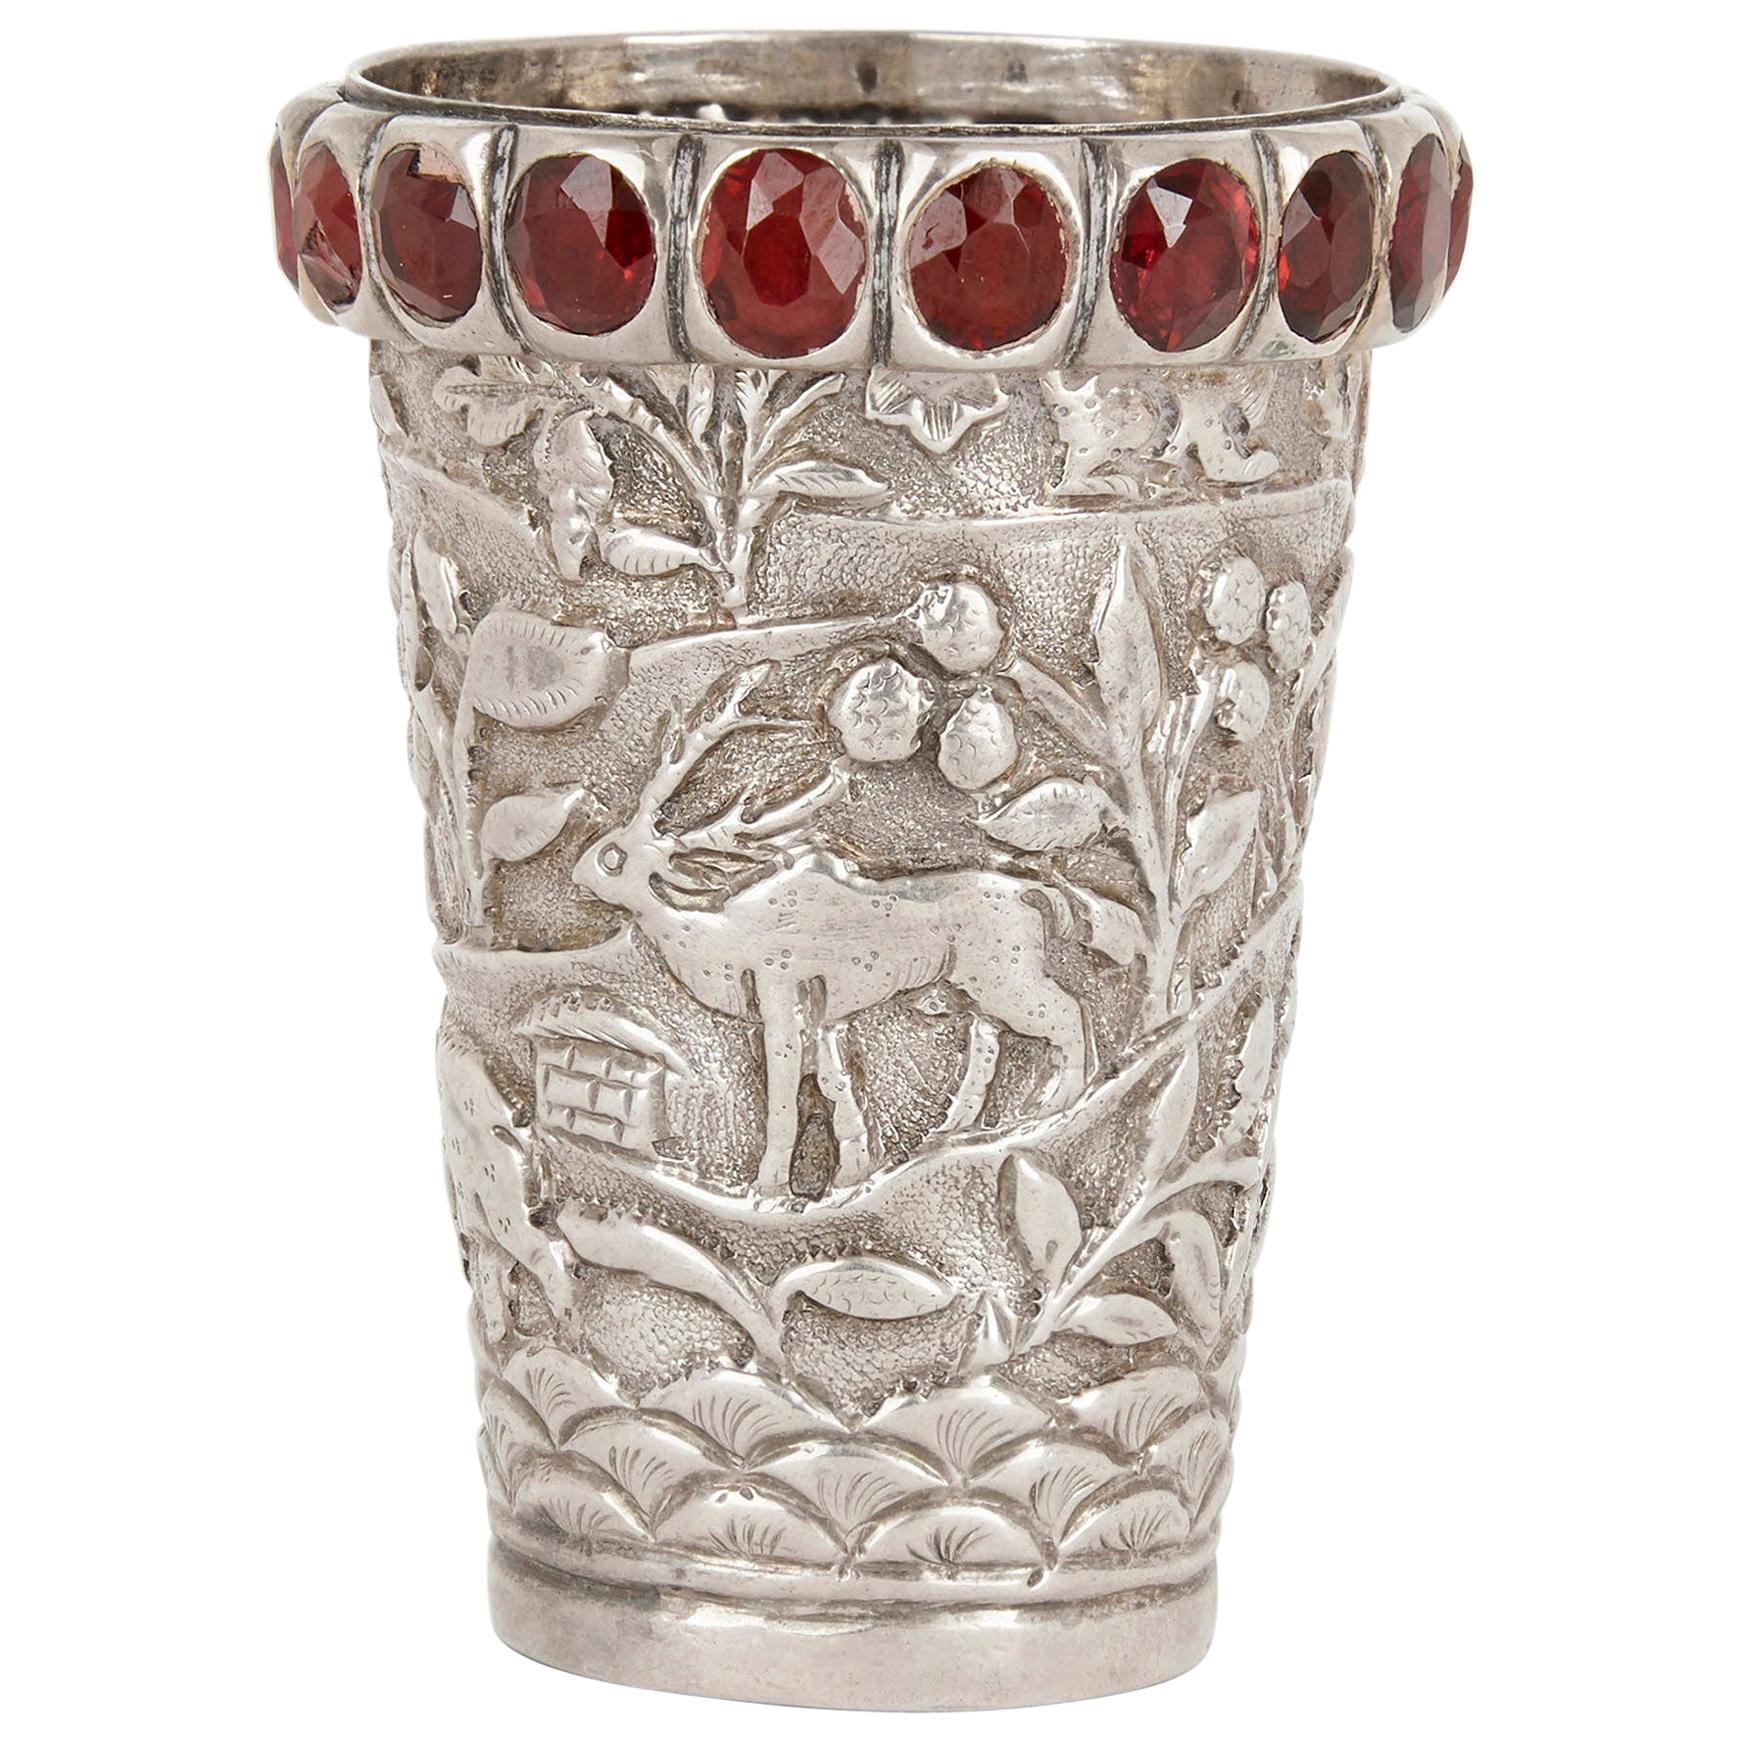 Indian Silver Cup with Jewels and Animals Decoration